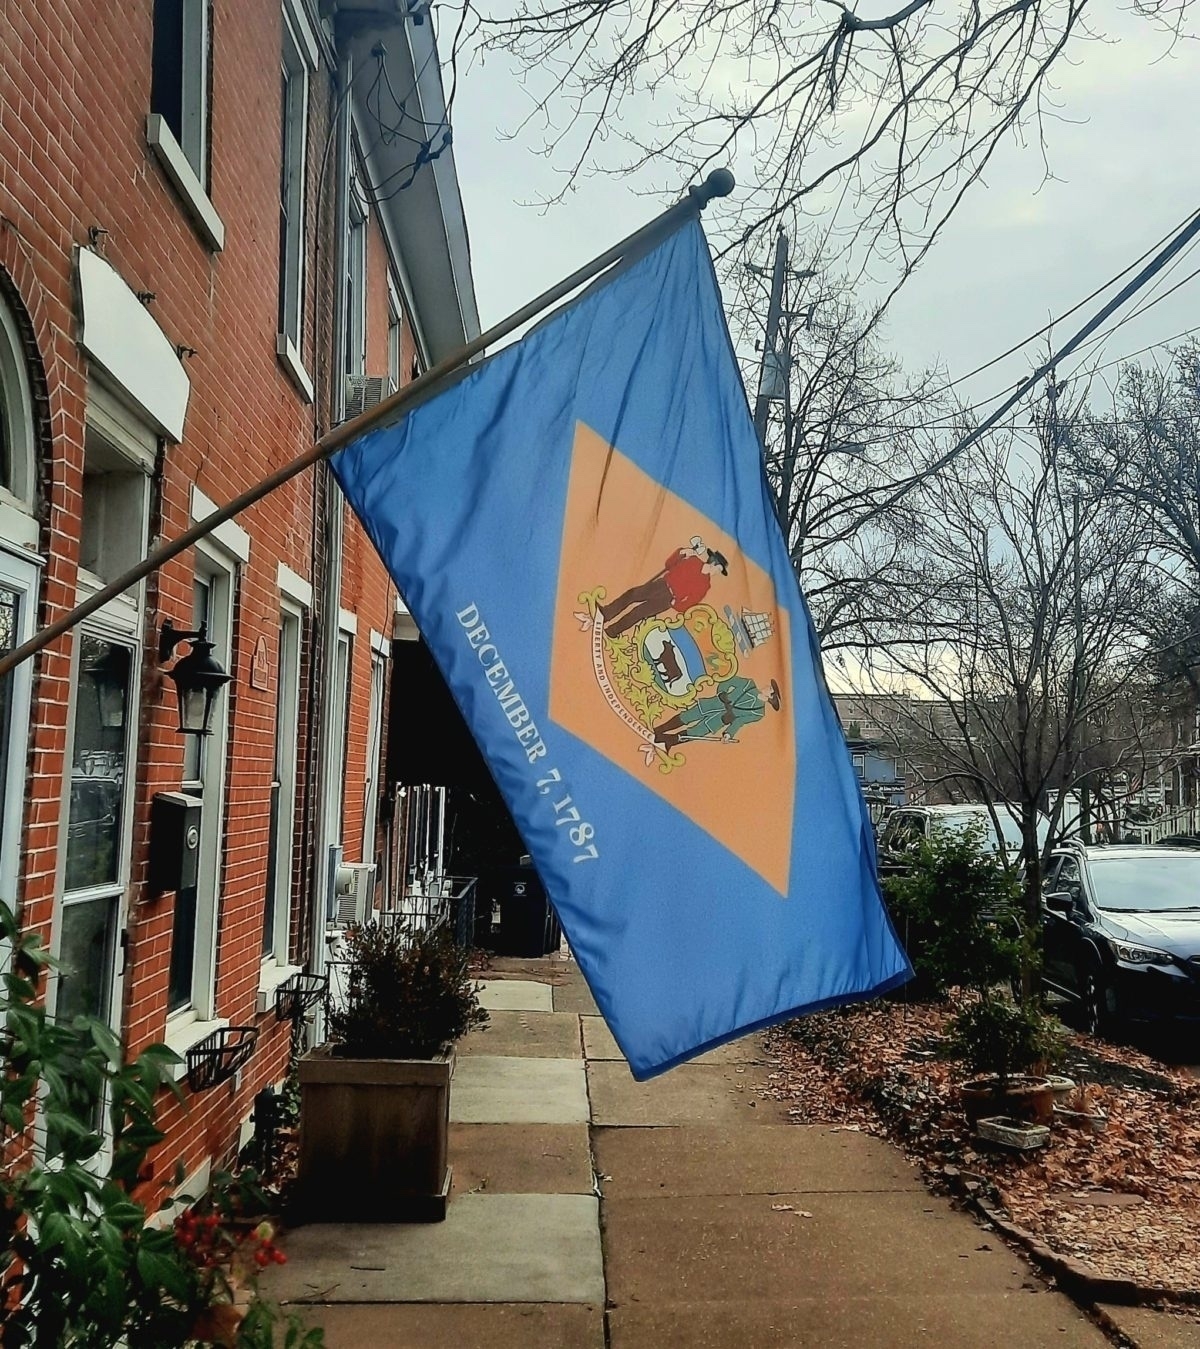 The flag of the first state flies in Wilmington's Forty Acres neighborhood | R.E. Vanella